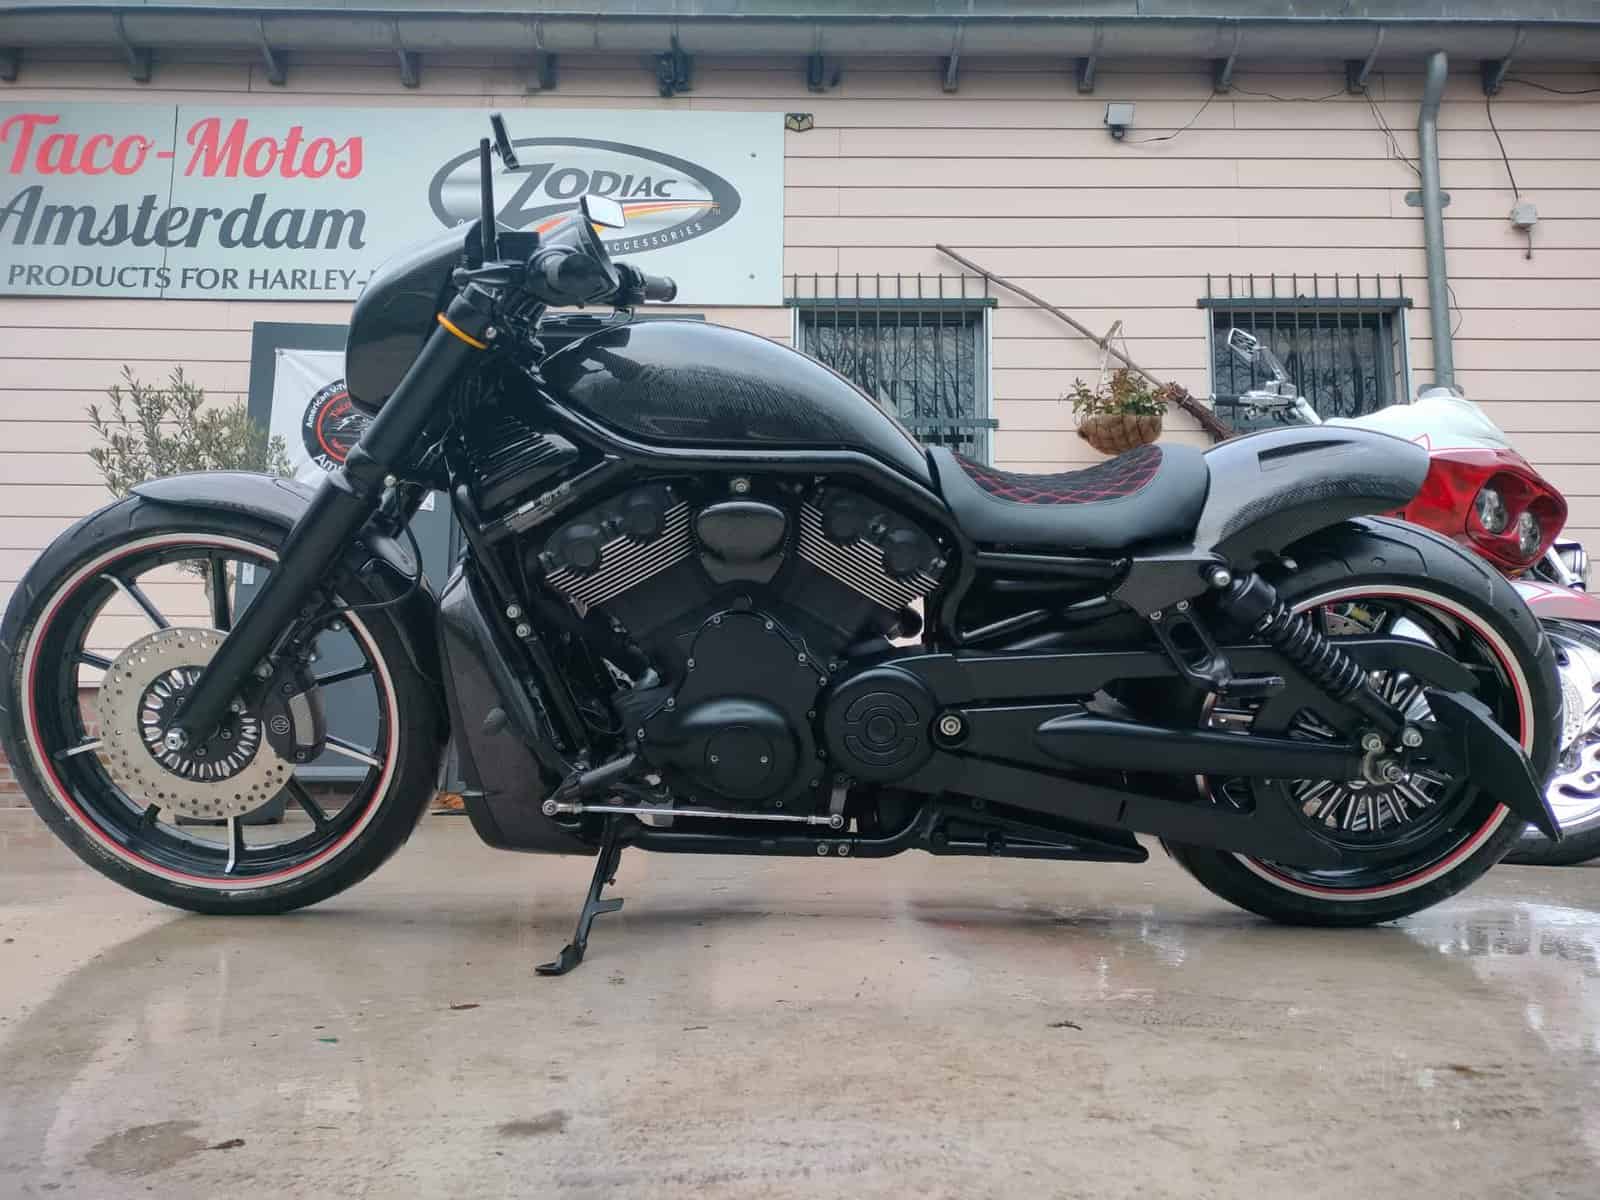 v-rod customizing and wrapping